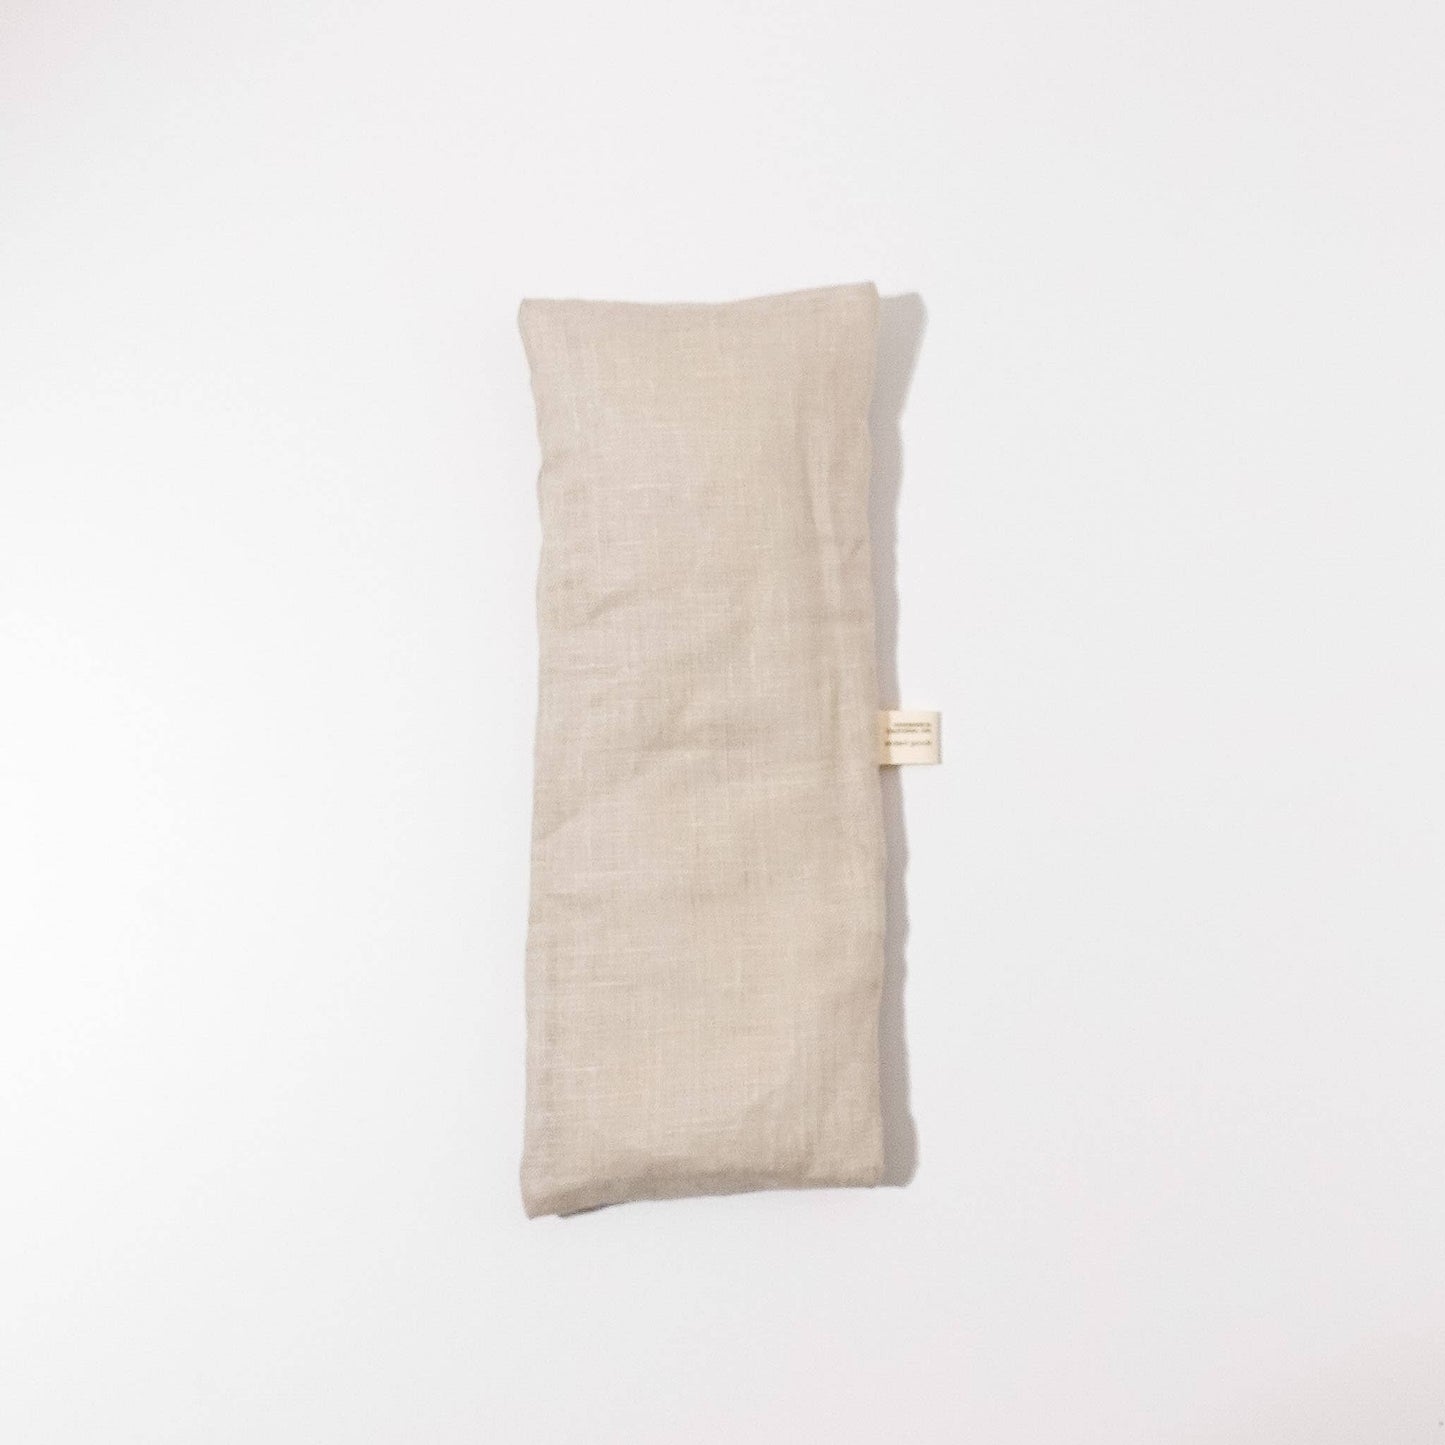 Eye Pillow Spa Therapy with Lavender -multiple colorways: Oatmeal